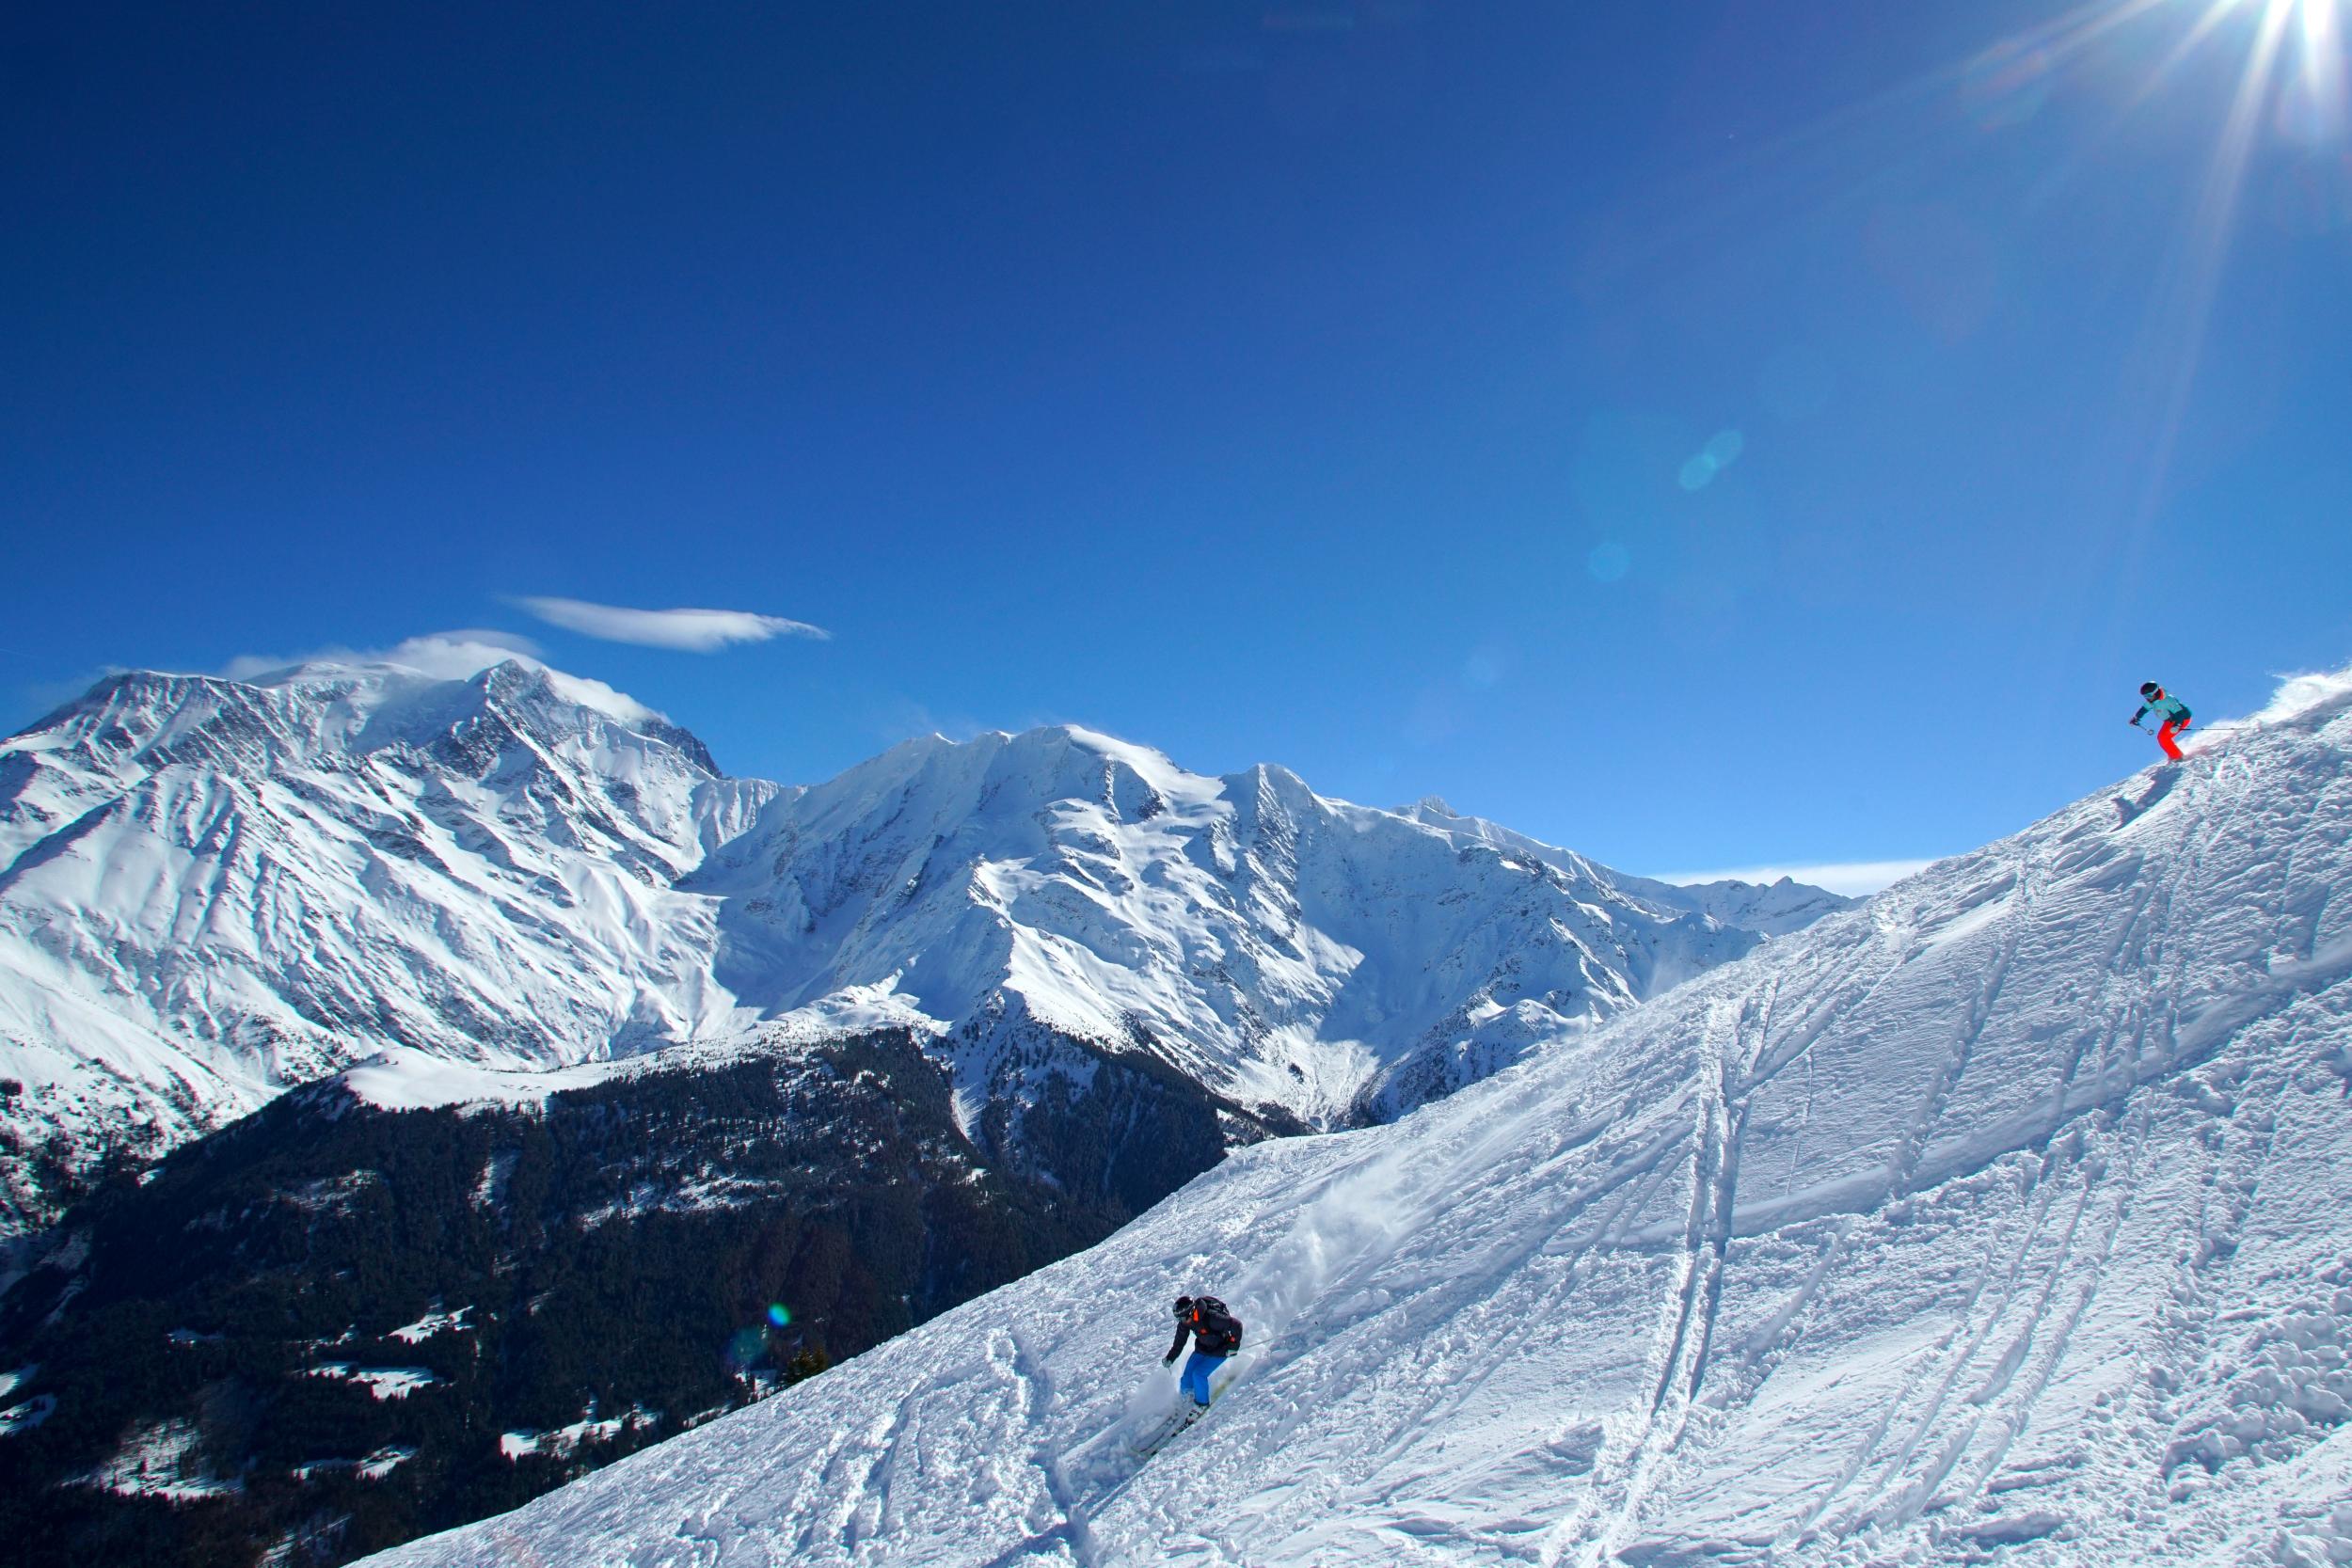 St Gervais gives access to the Evasion Mont Blanc